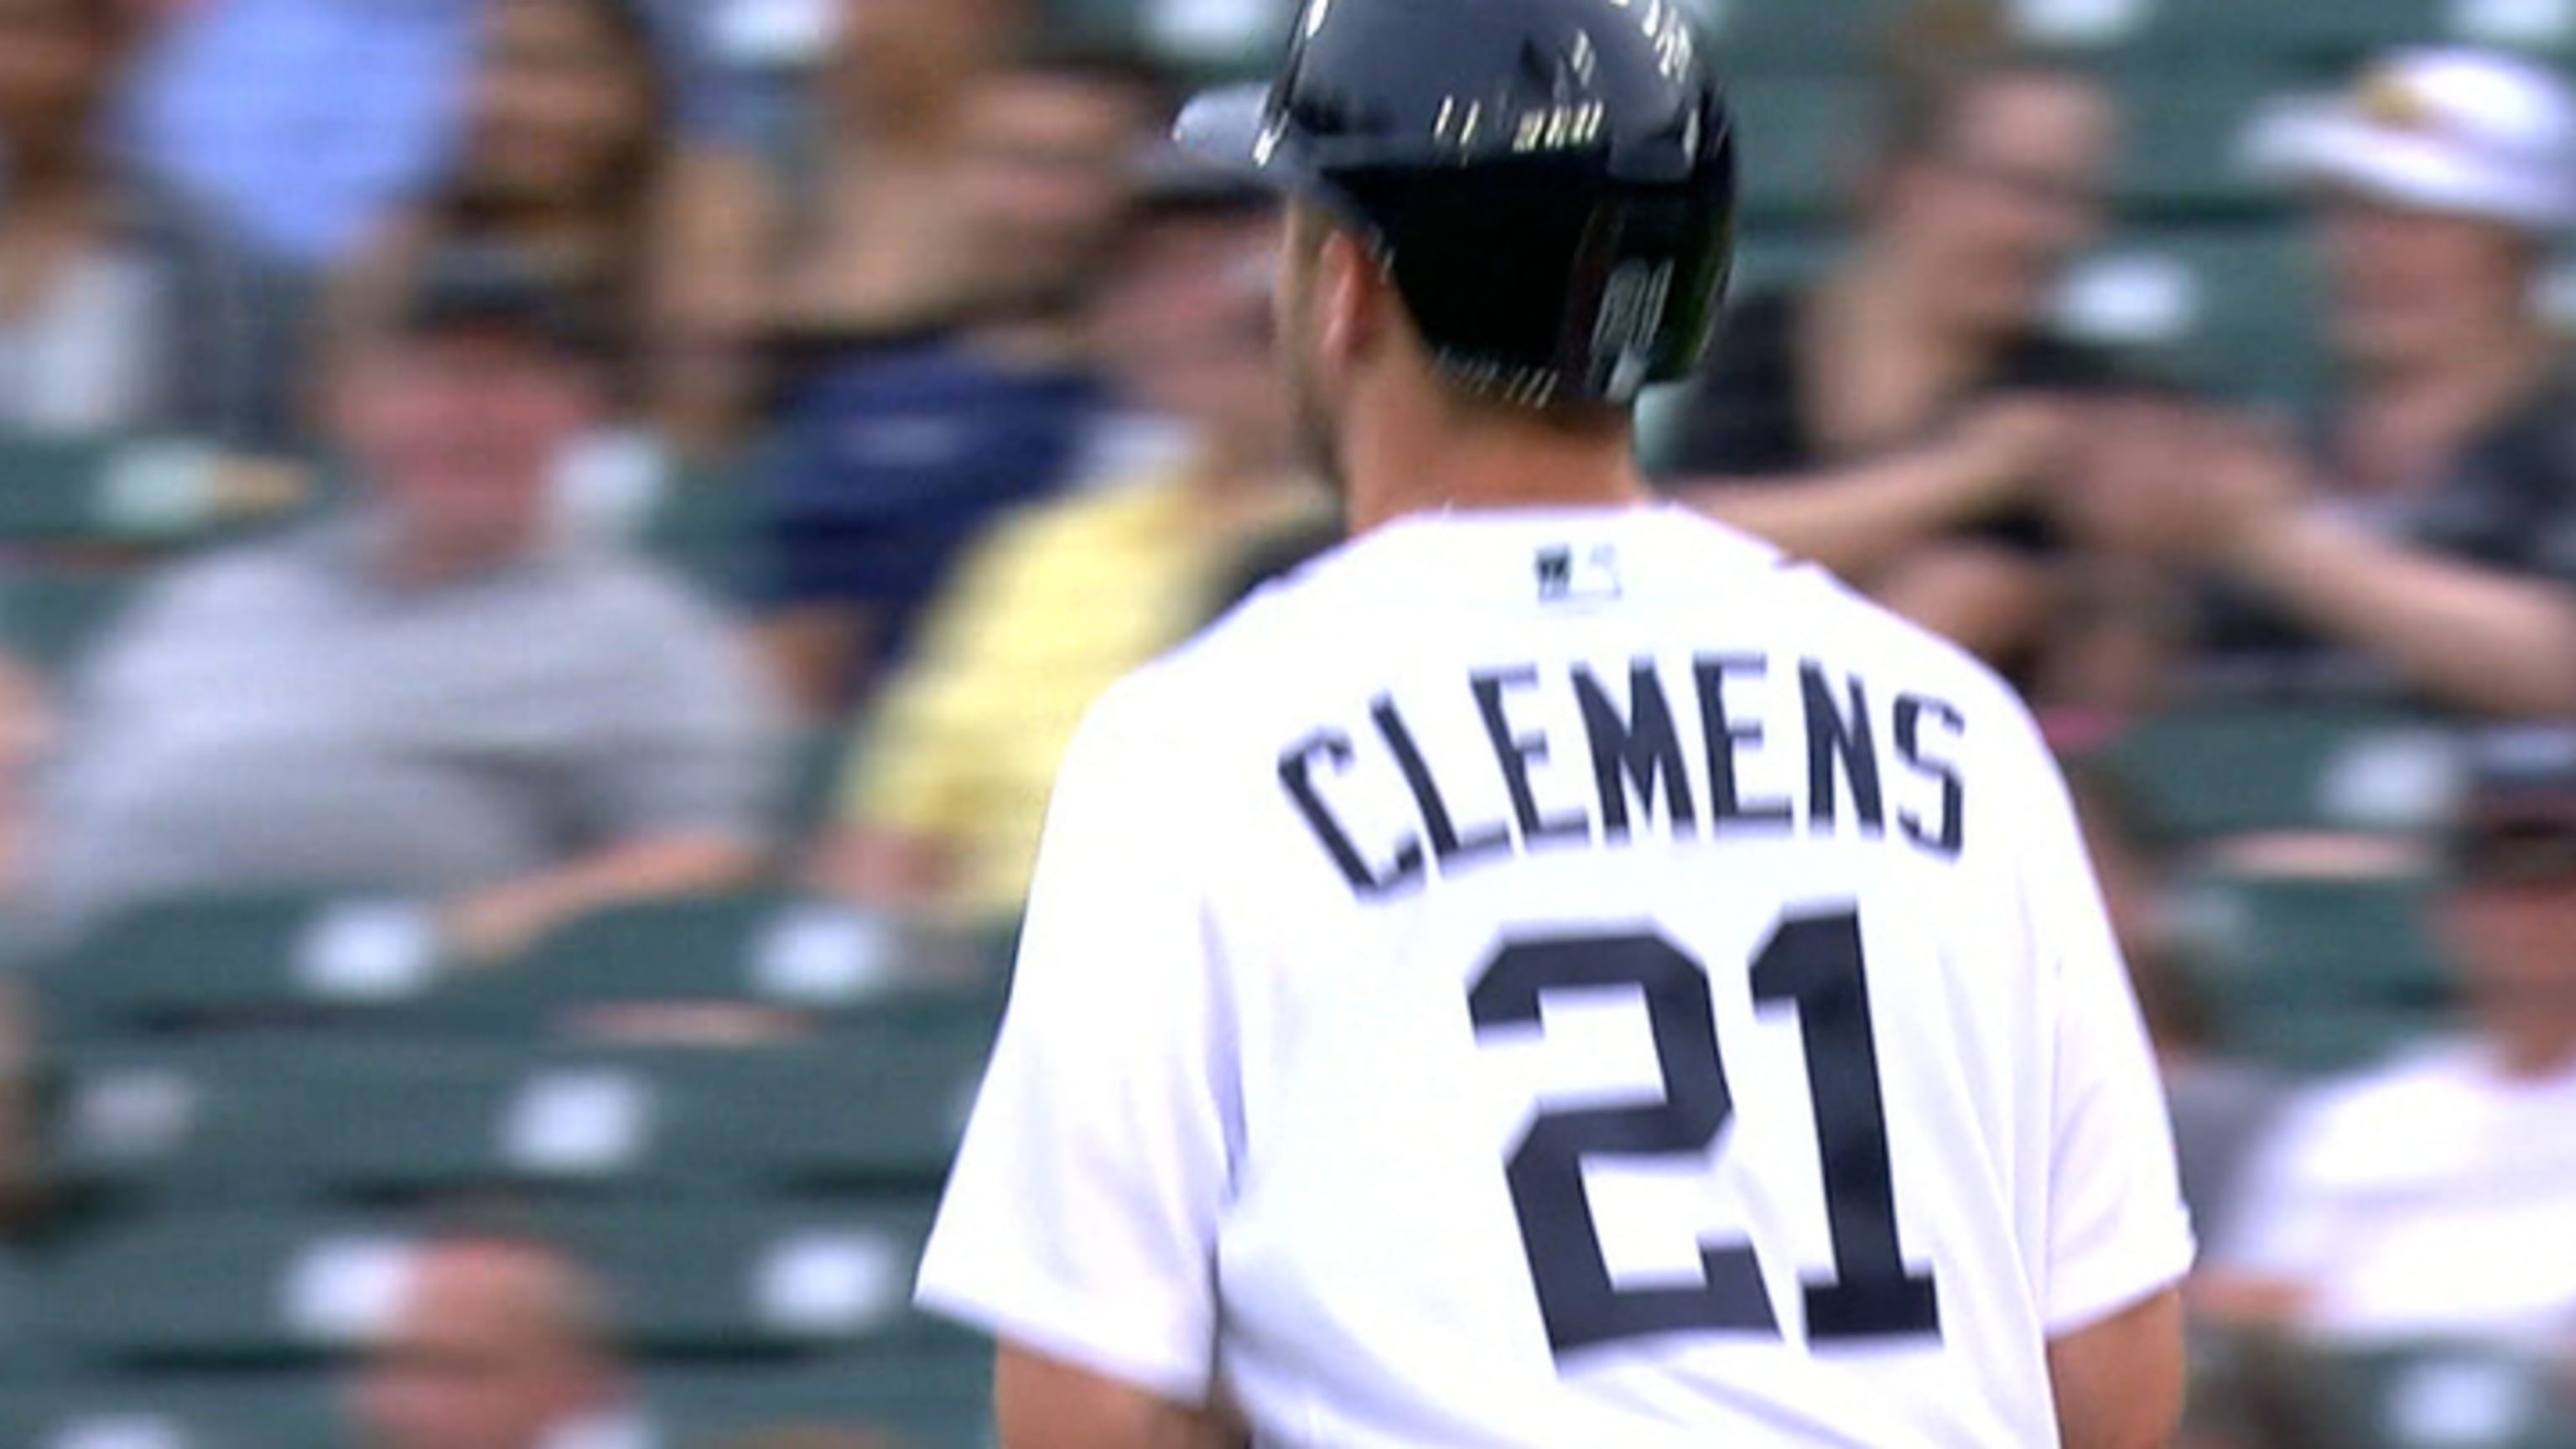 Roger Clemens shares thrill of Kody's MLB debut with Detroit Tigers